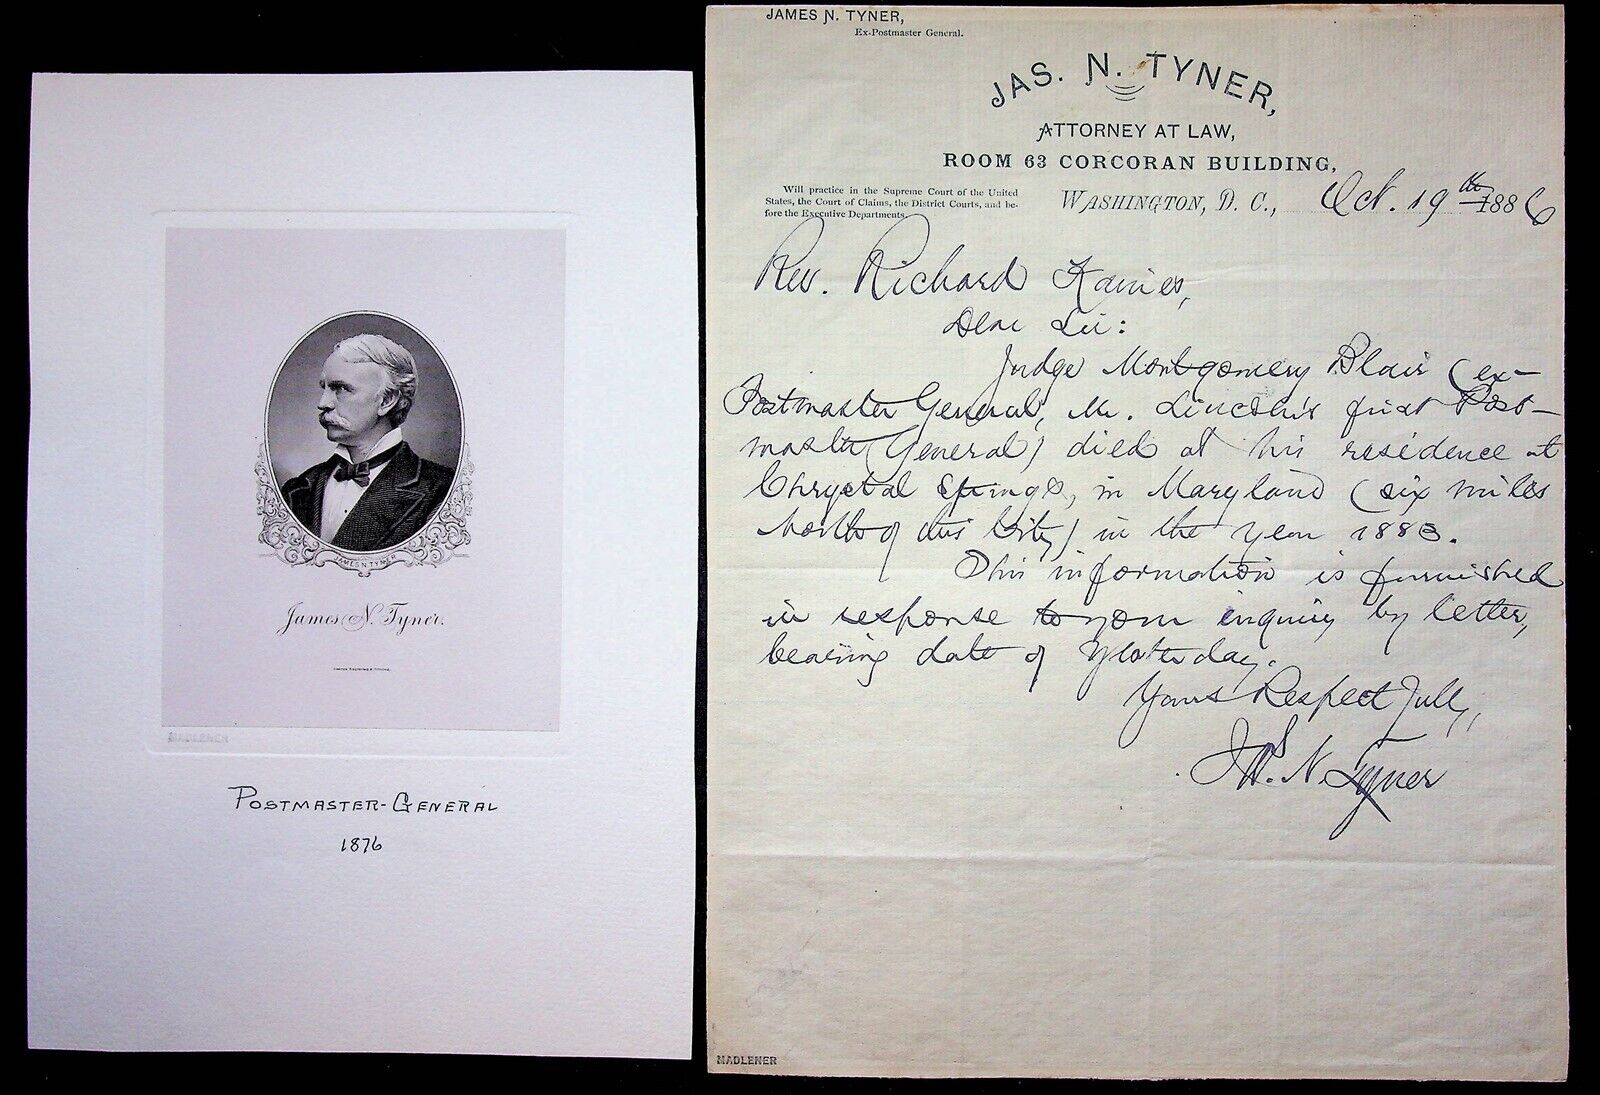 James Tyner 1876 Postmaster General Photo + Attorney Letterhead Signed 1886